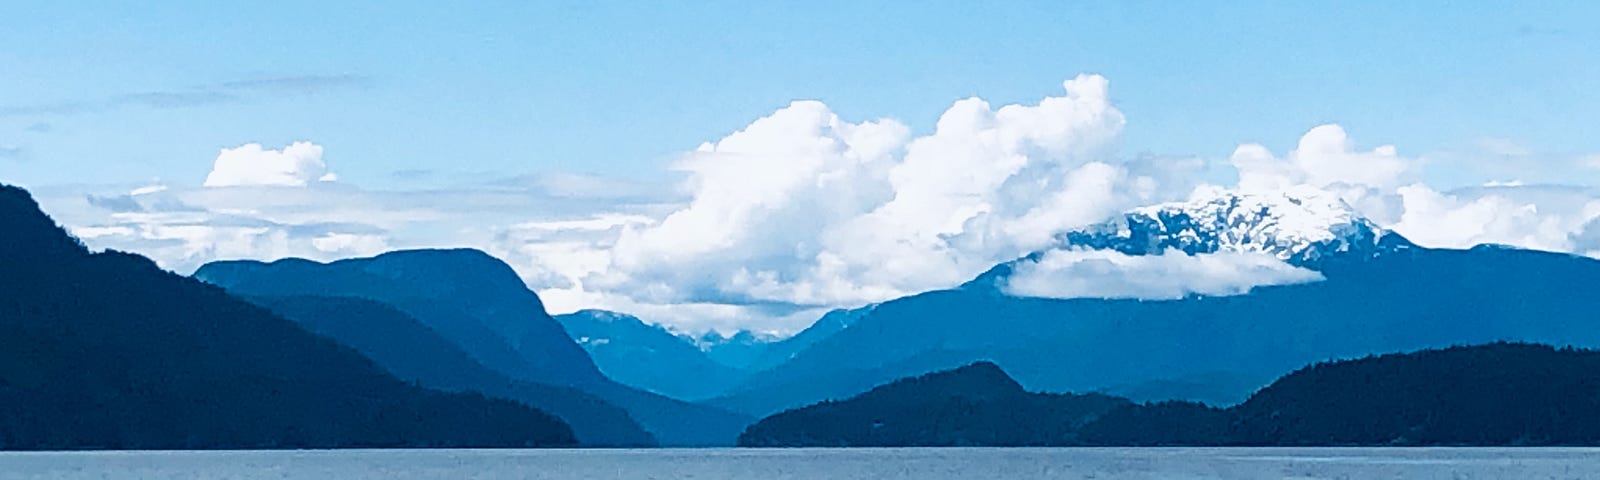 The ocean fronts a mountain range with fluffy white clouds behind it